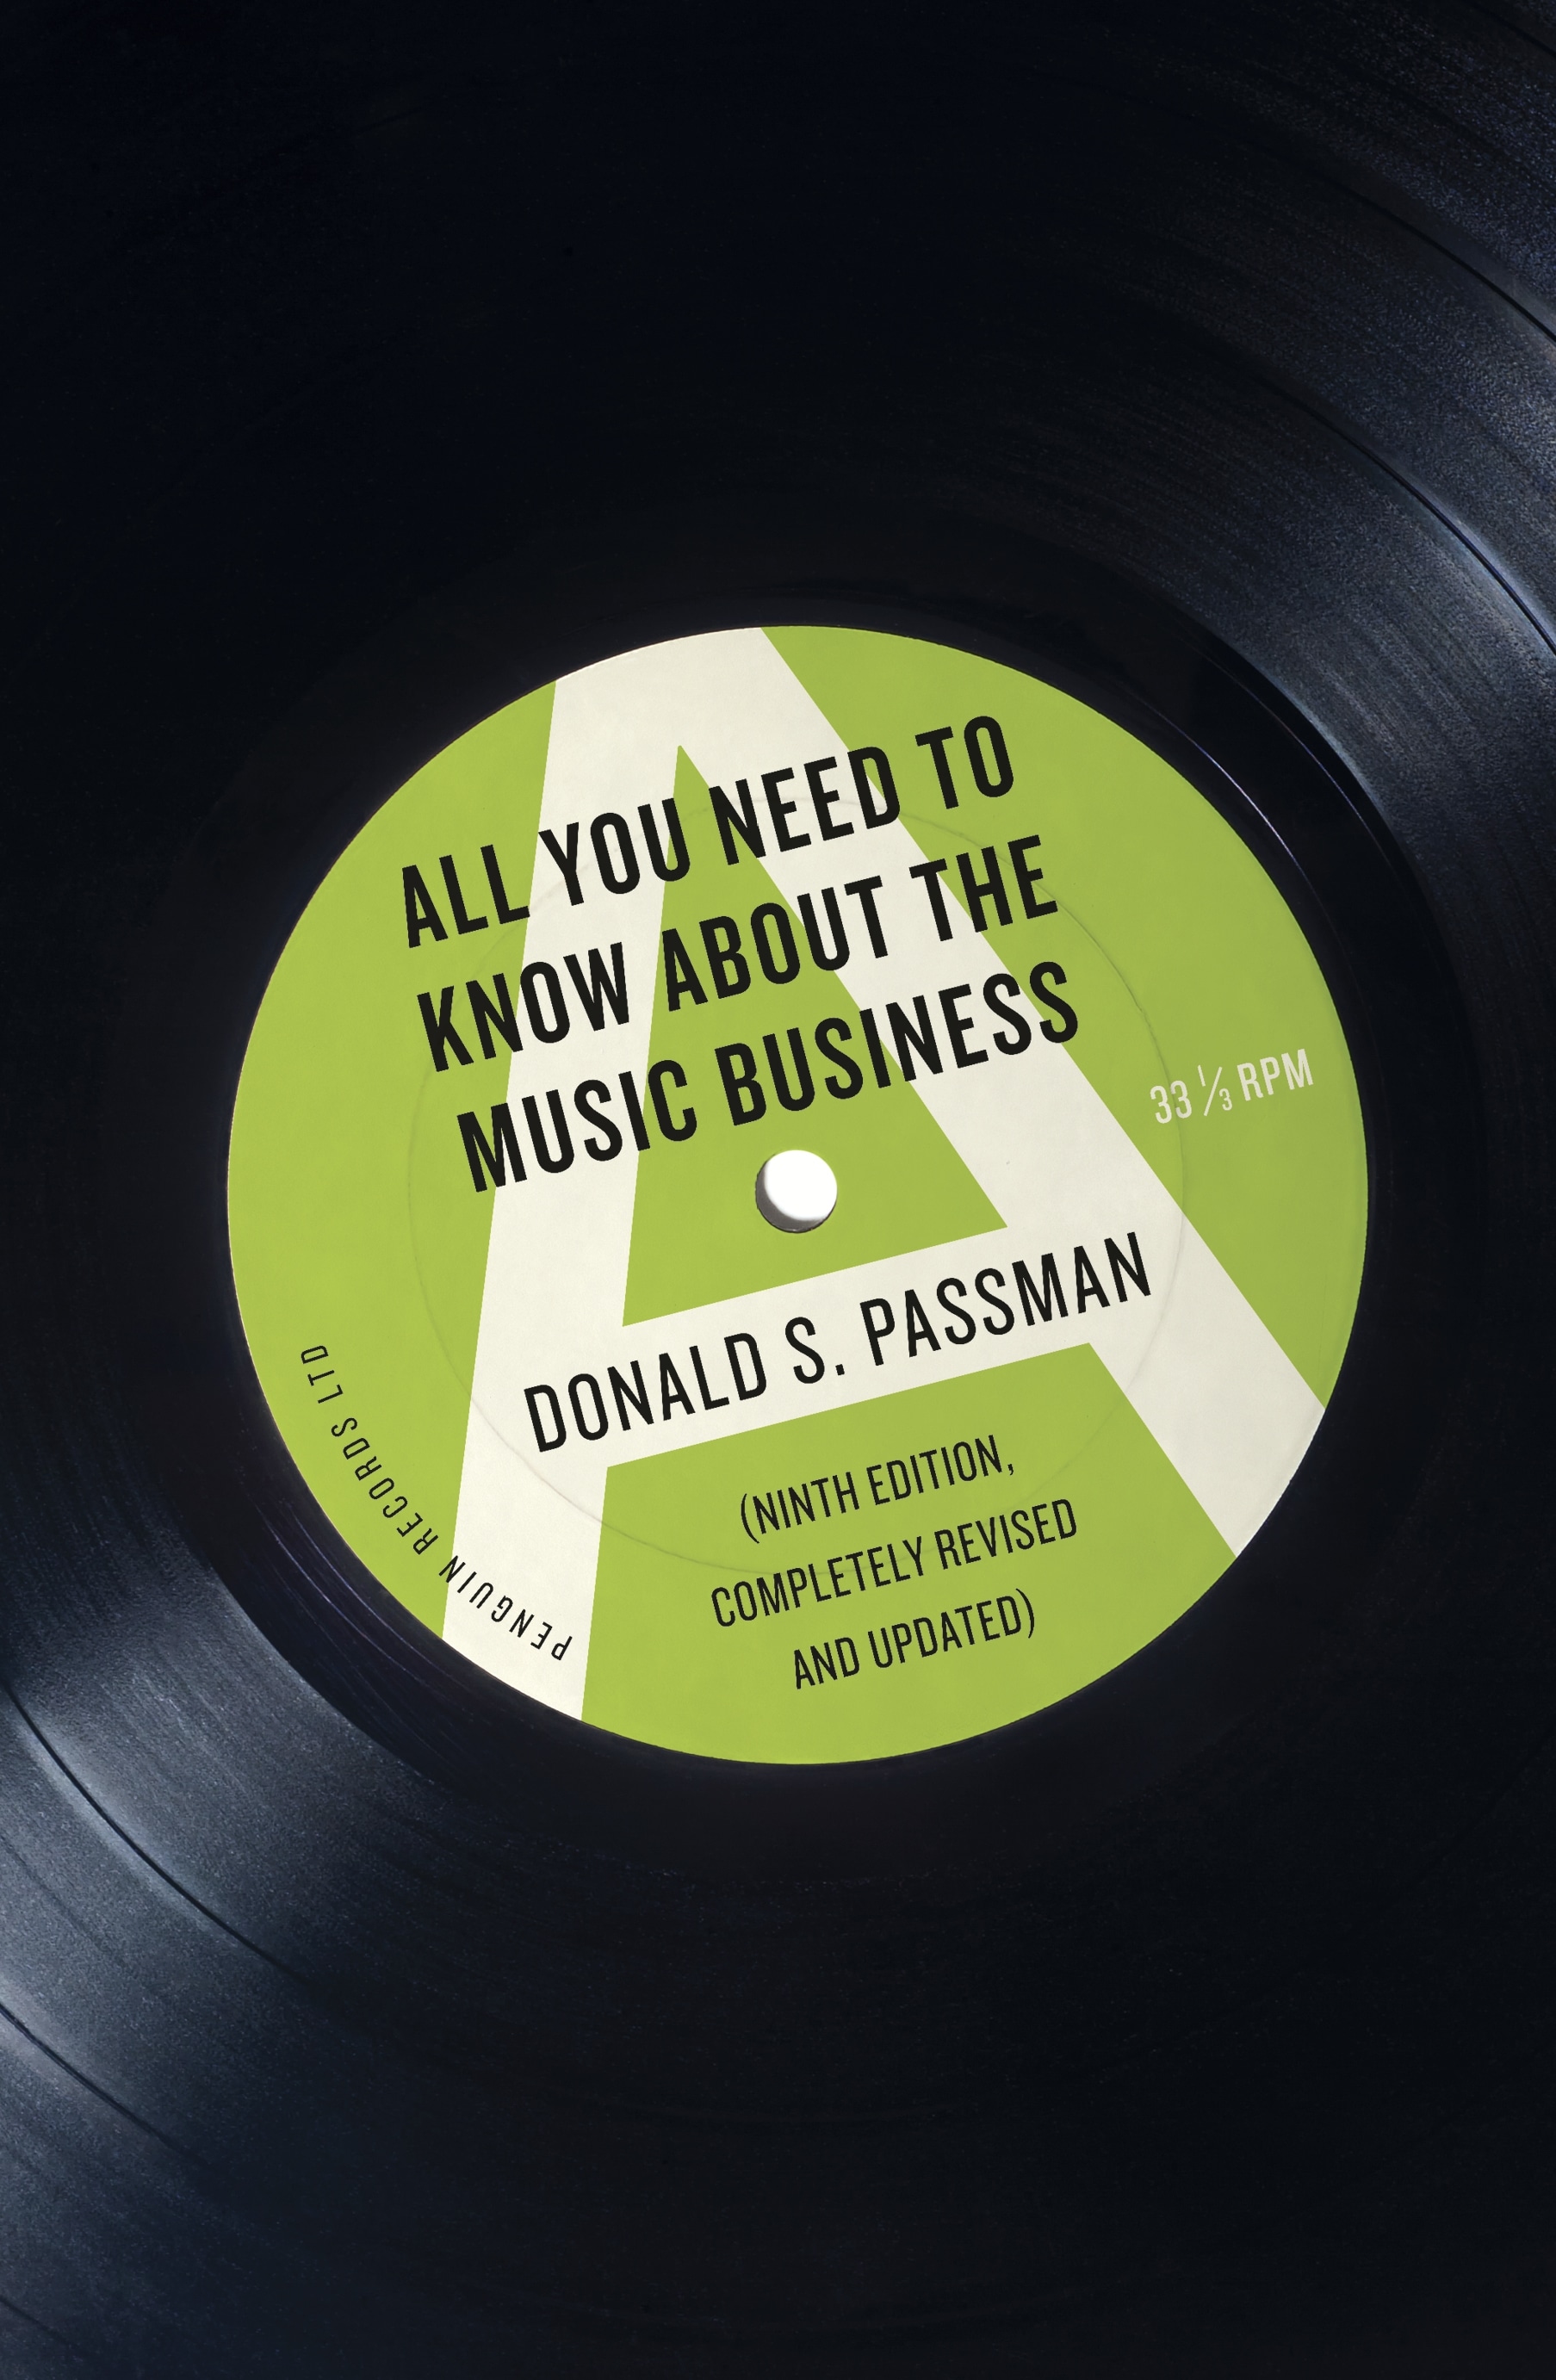 Book “All You Need to Know About the Music Business” by Donald S Passman — January 7, 2021